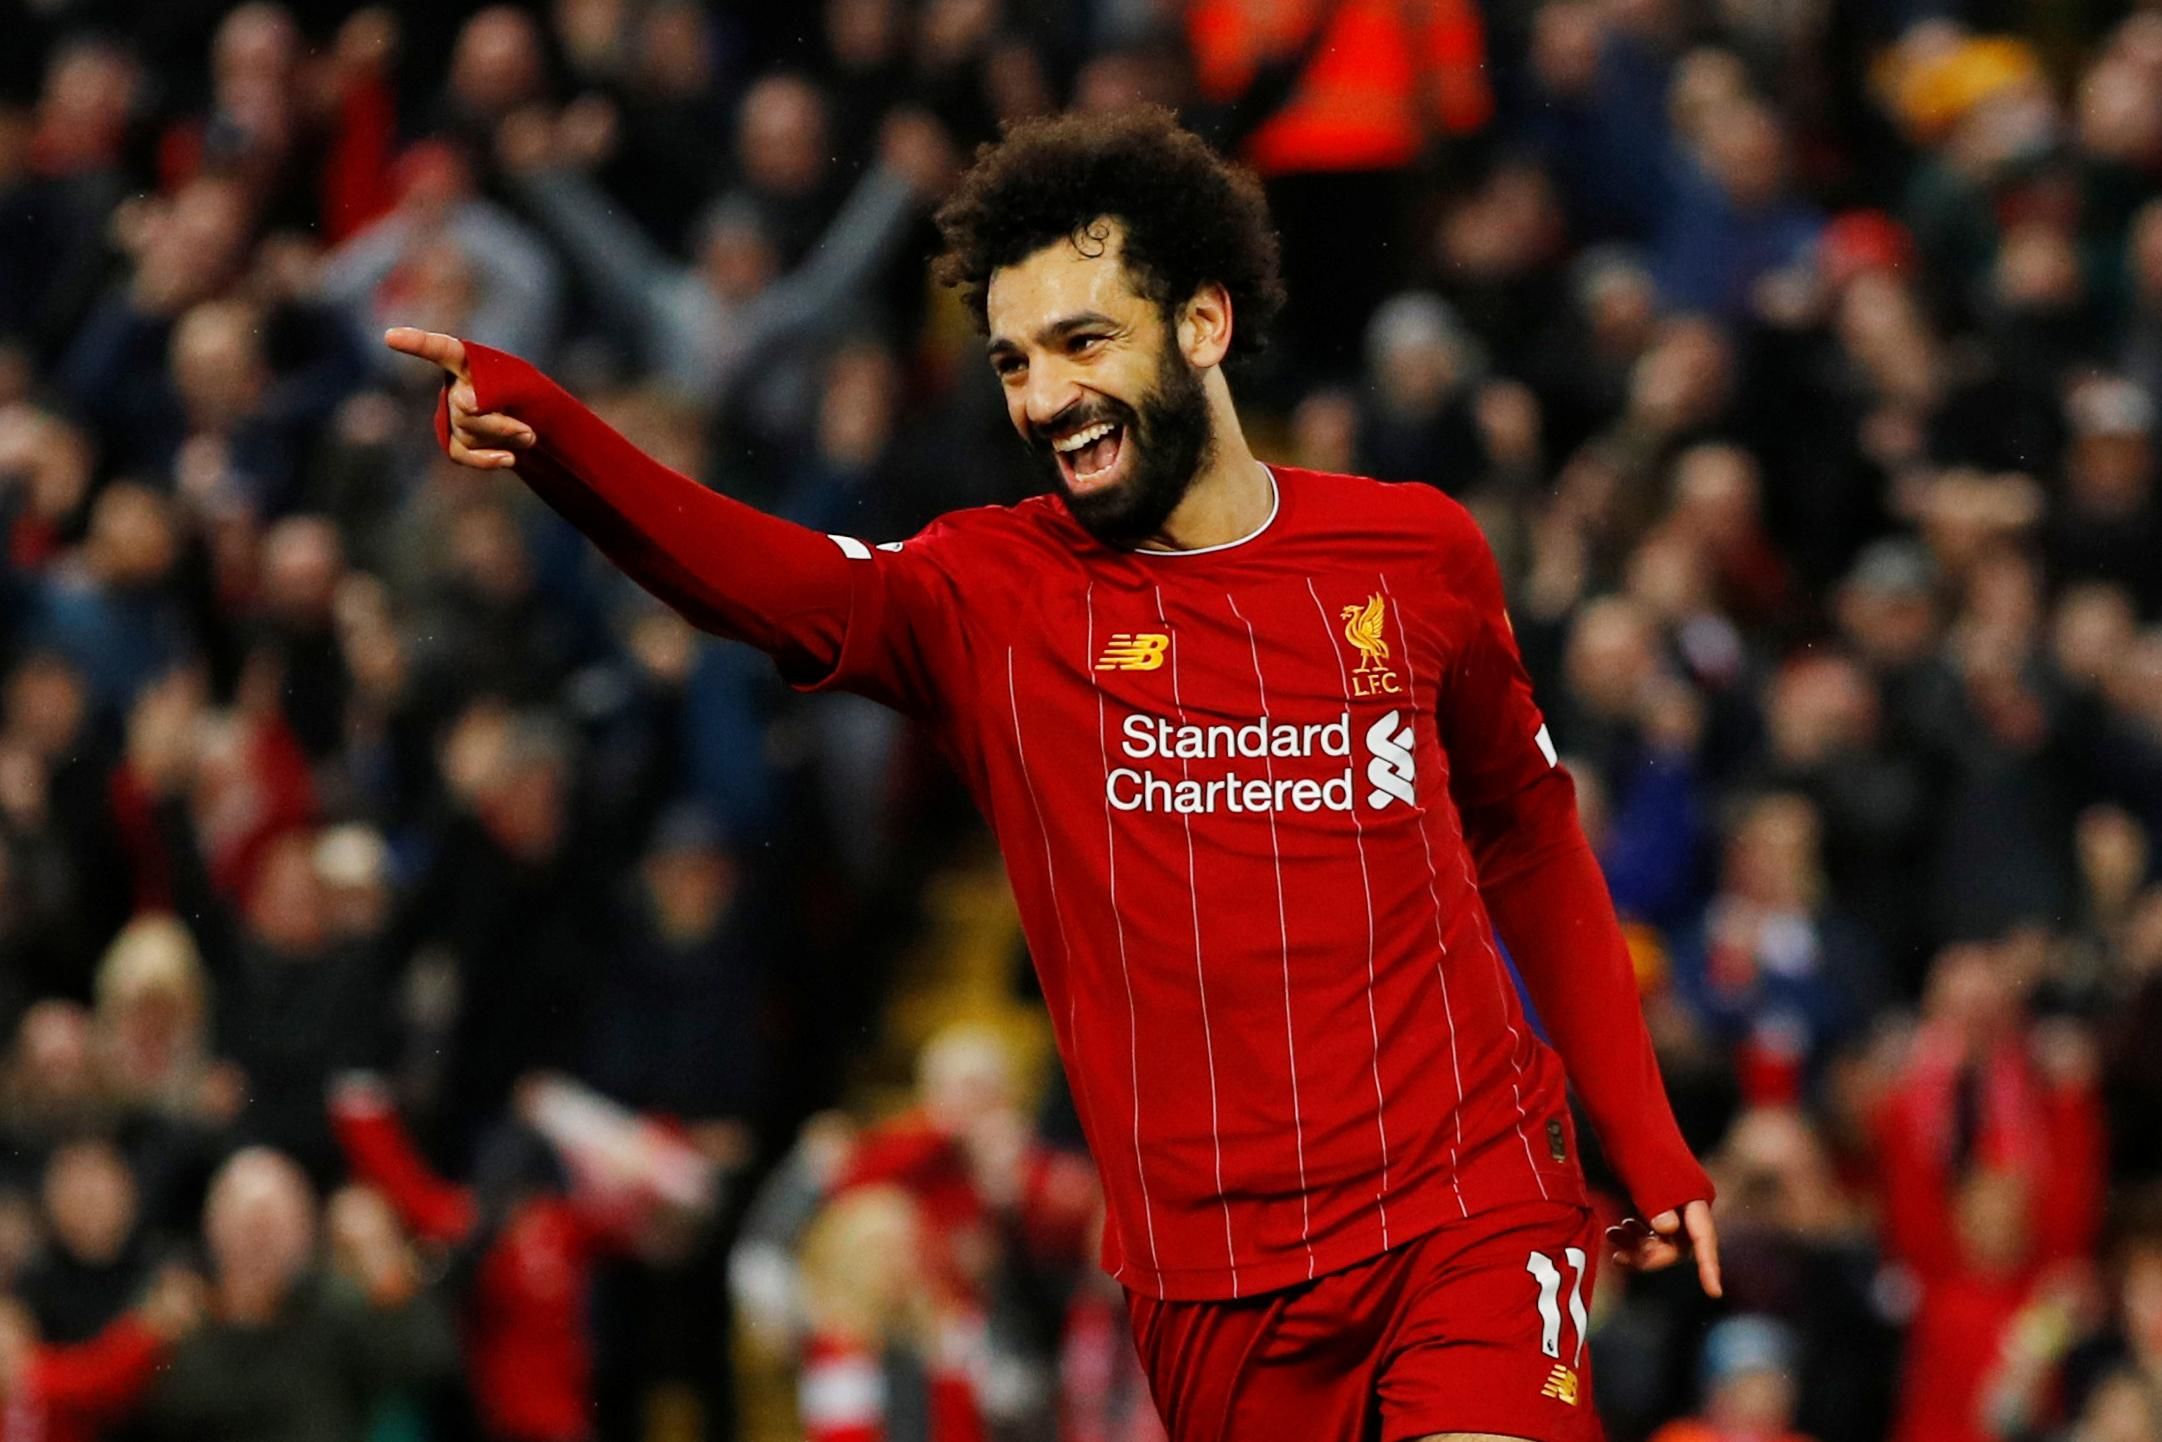 Is Mohammad Salah the best in the league right now?